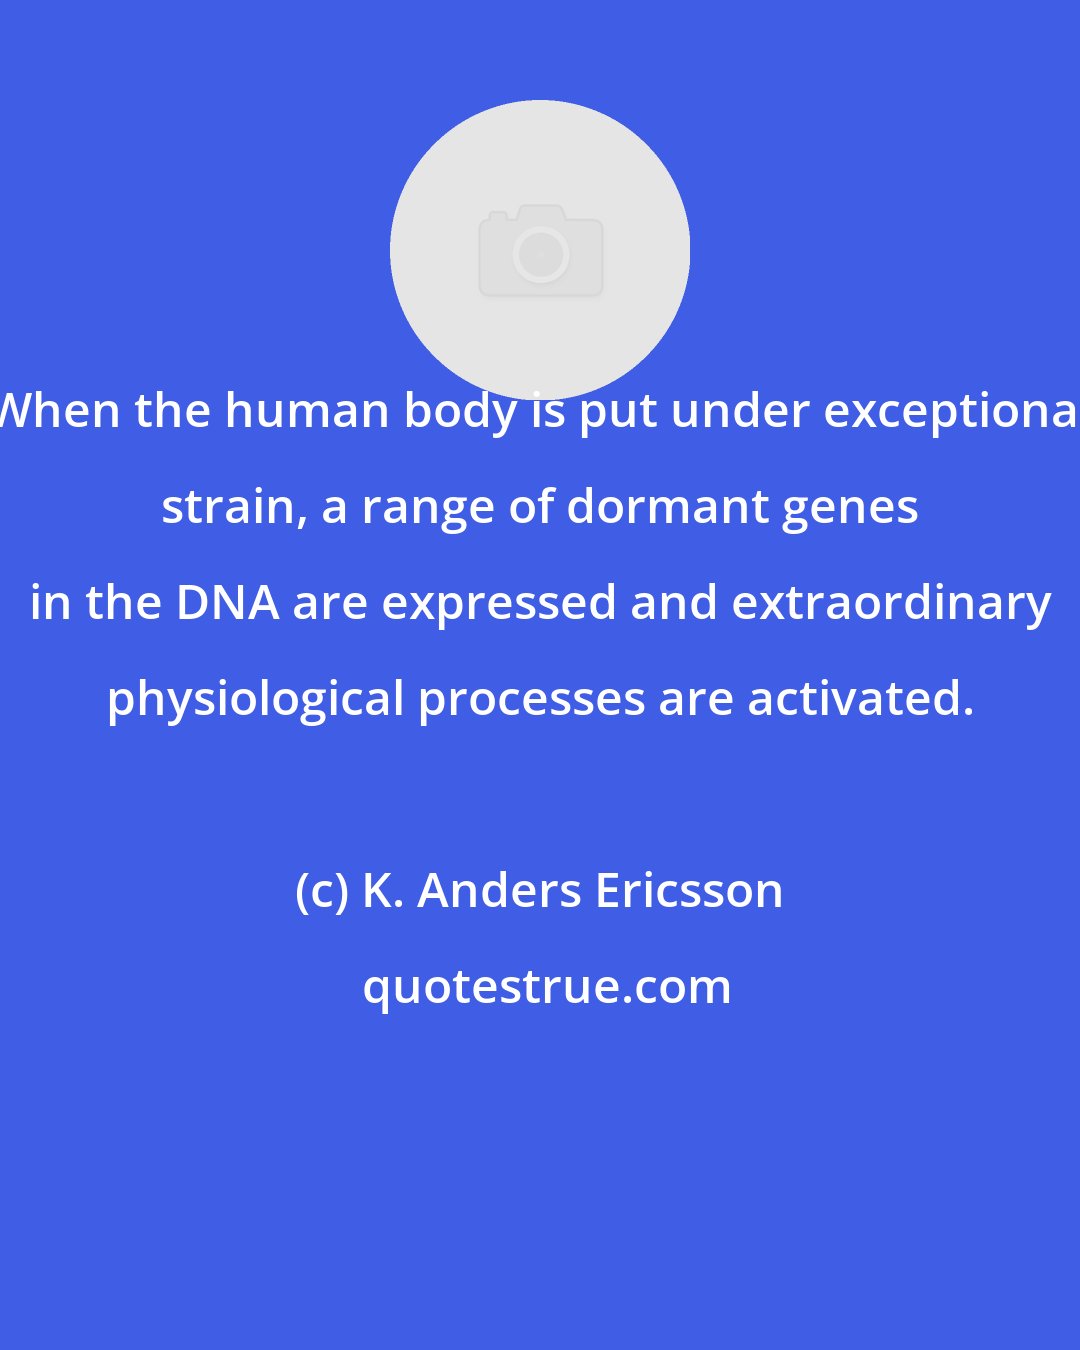 K. Anders Ericsson: When the human body is put under exceptional strain, a range of dormant genes in the DNA are expressed and extraordinary physiological processes are activated.